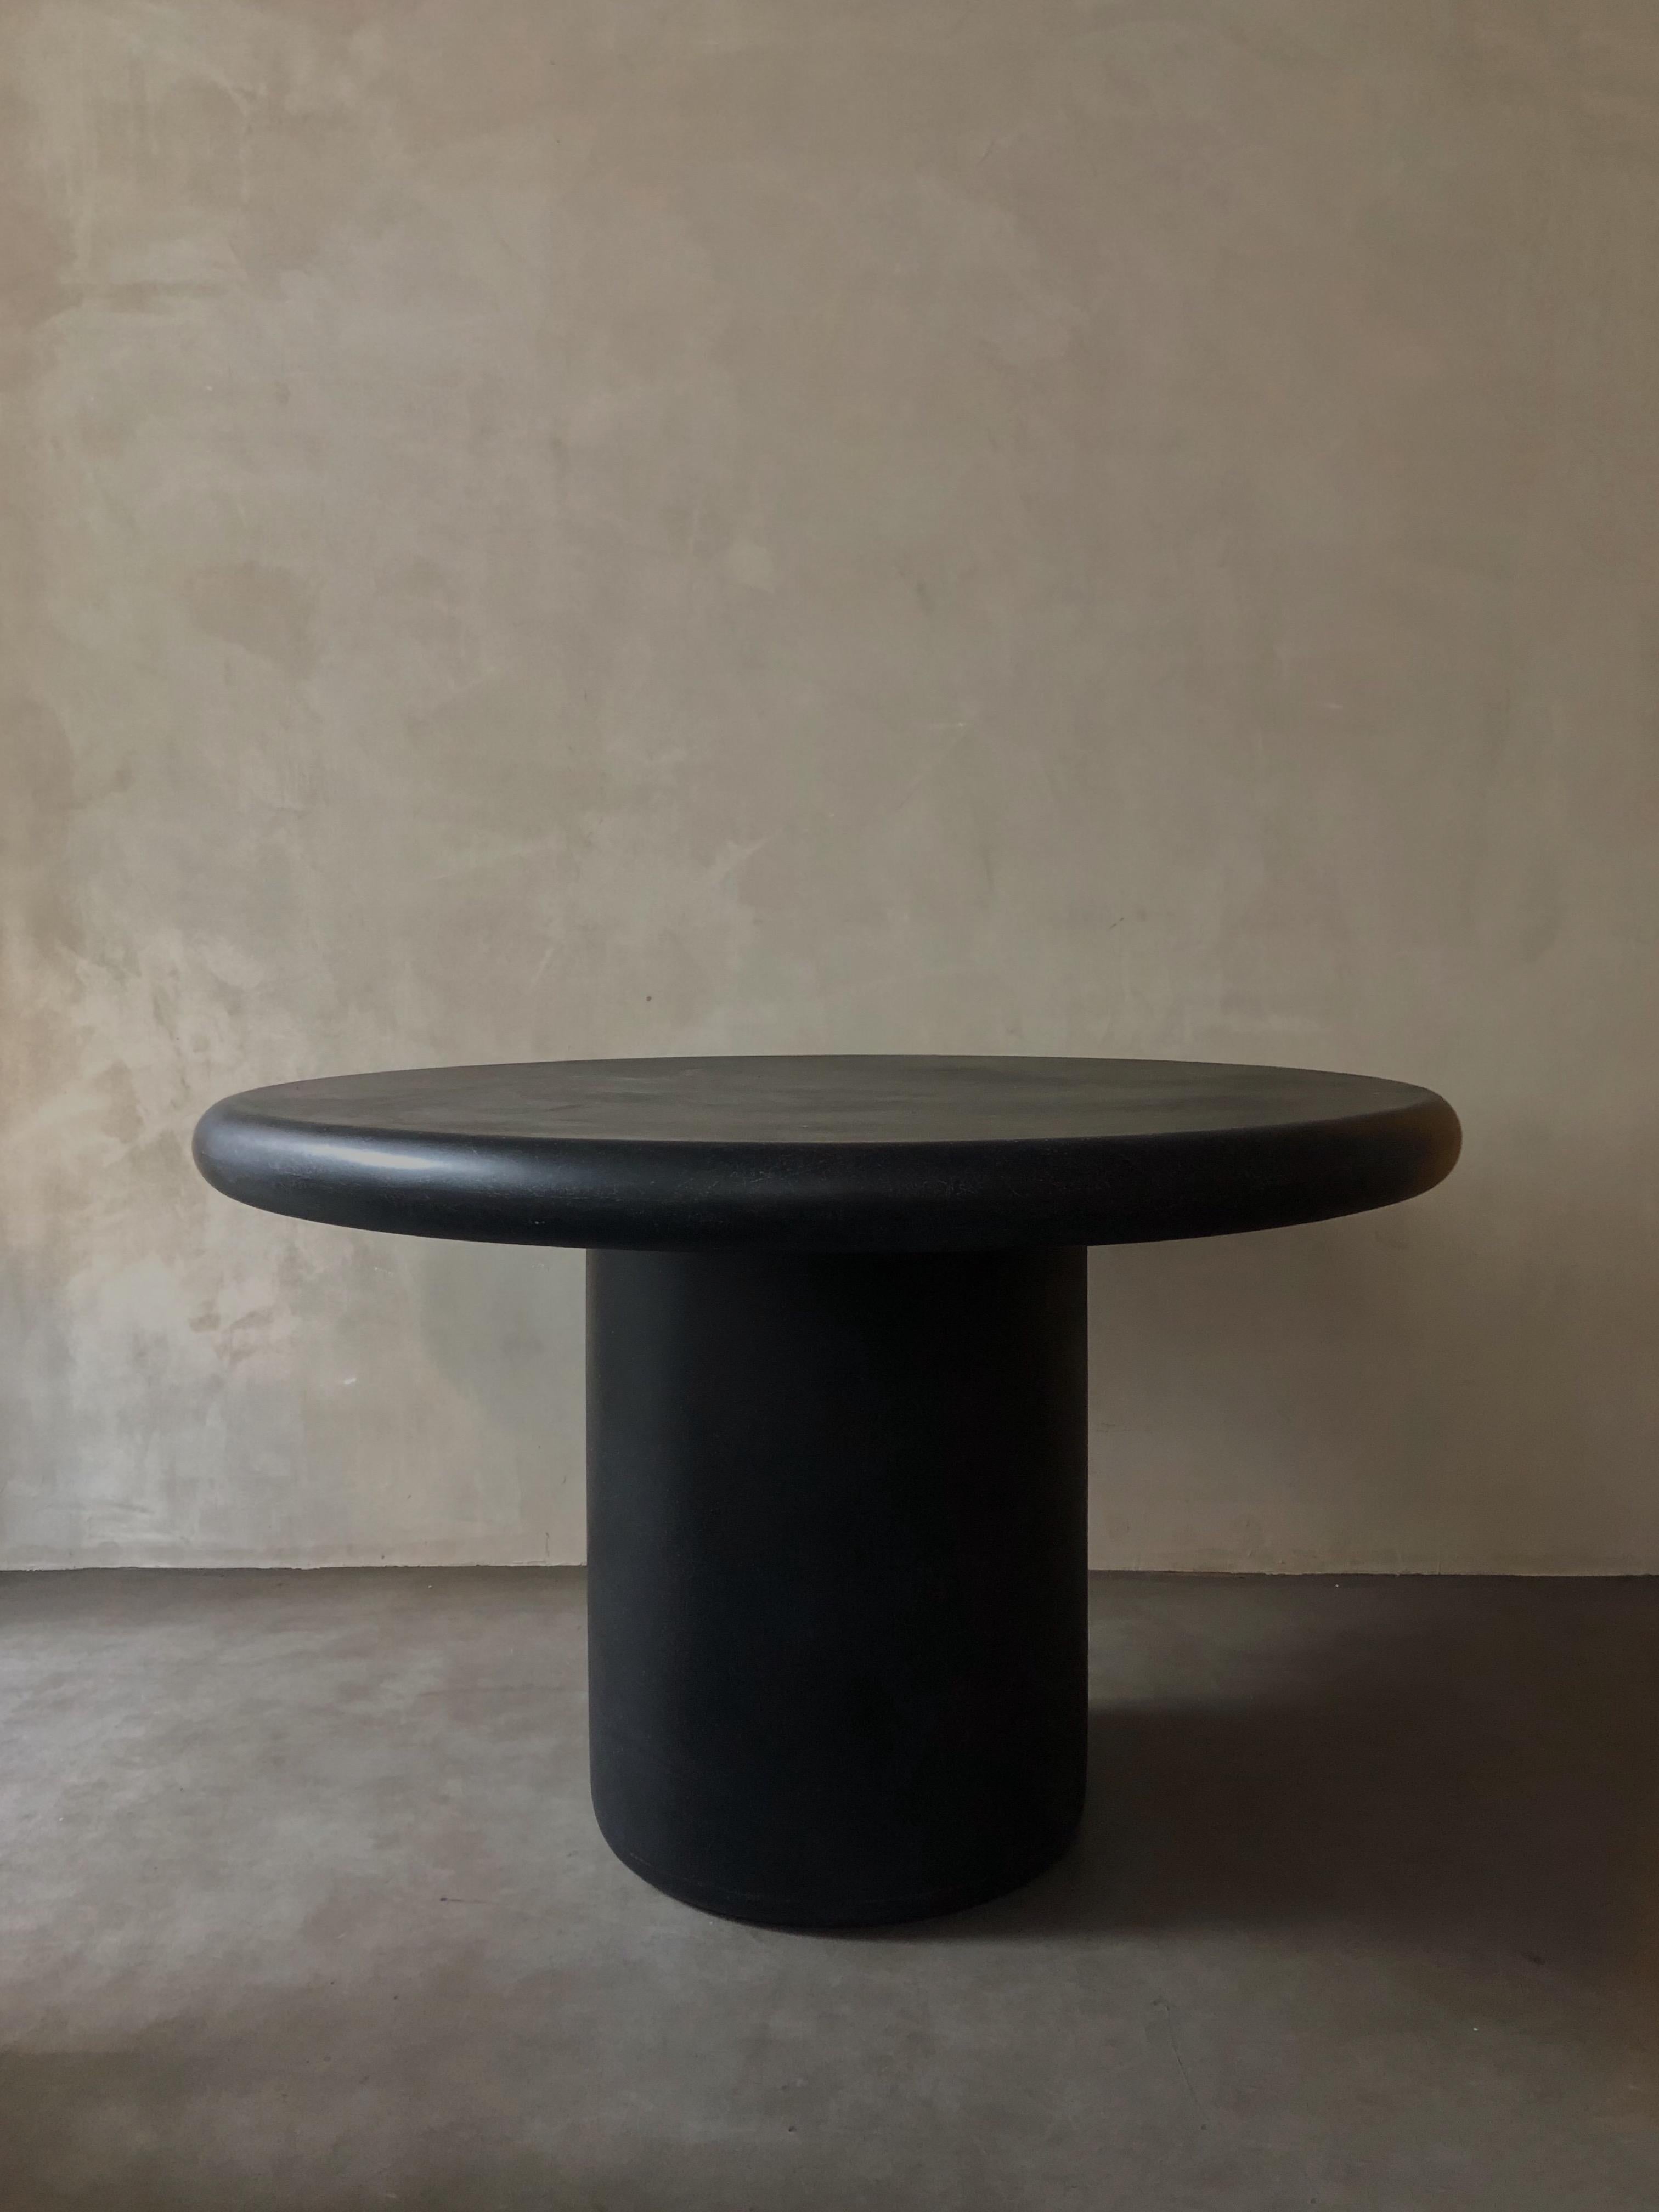 Black round table by Karstudio
Materials: FRP
Dimensions: 120 x 74 cm

This piece is suitable for outdoor use.
Available in black or white. 

A combination of smooth and steady, a good adaptation to various interior style.

Kar- is the root